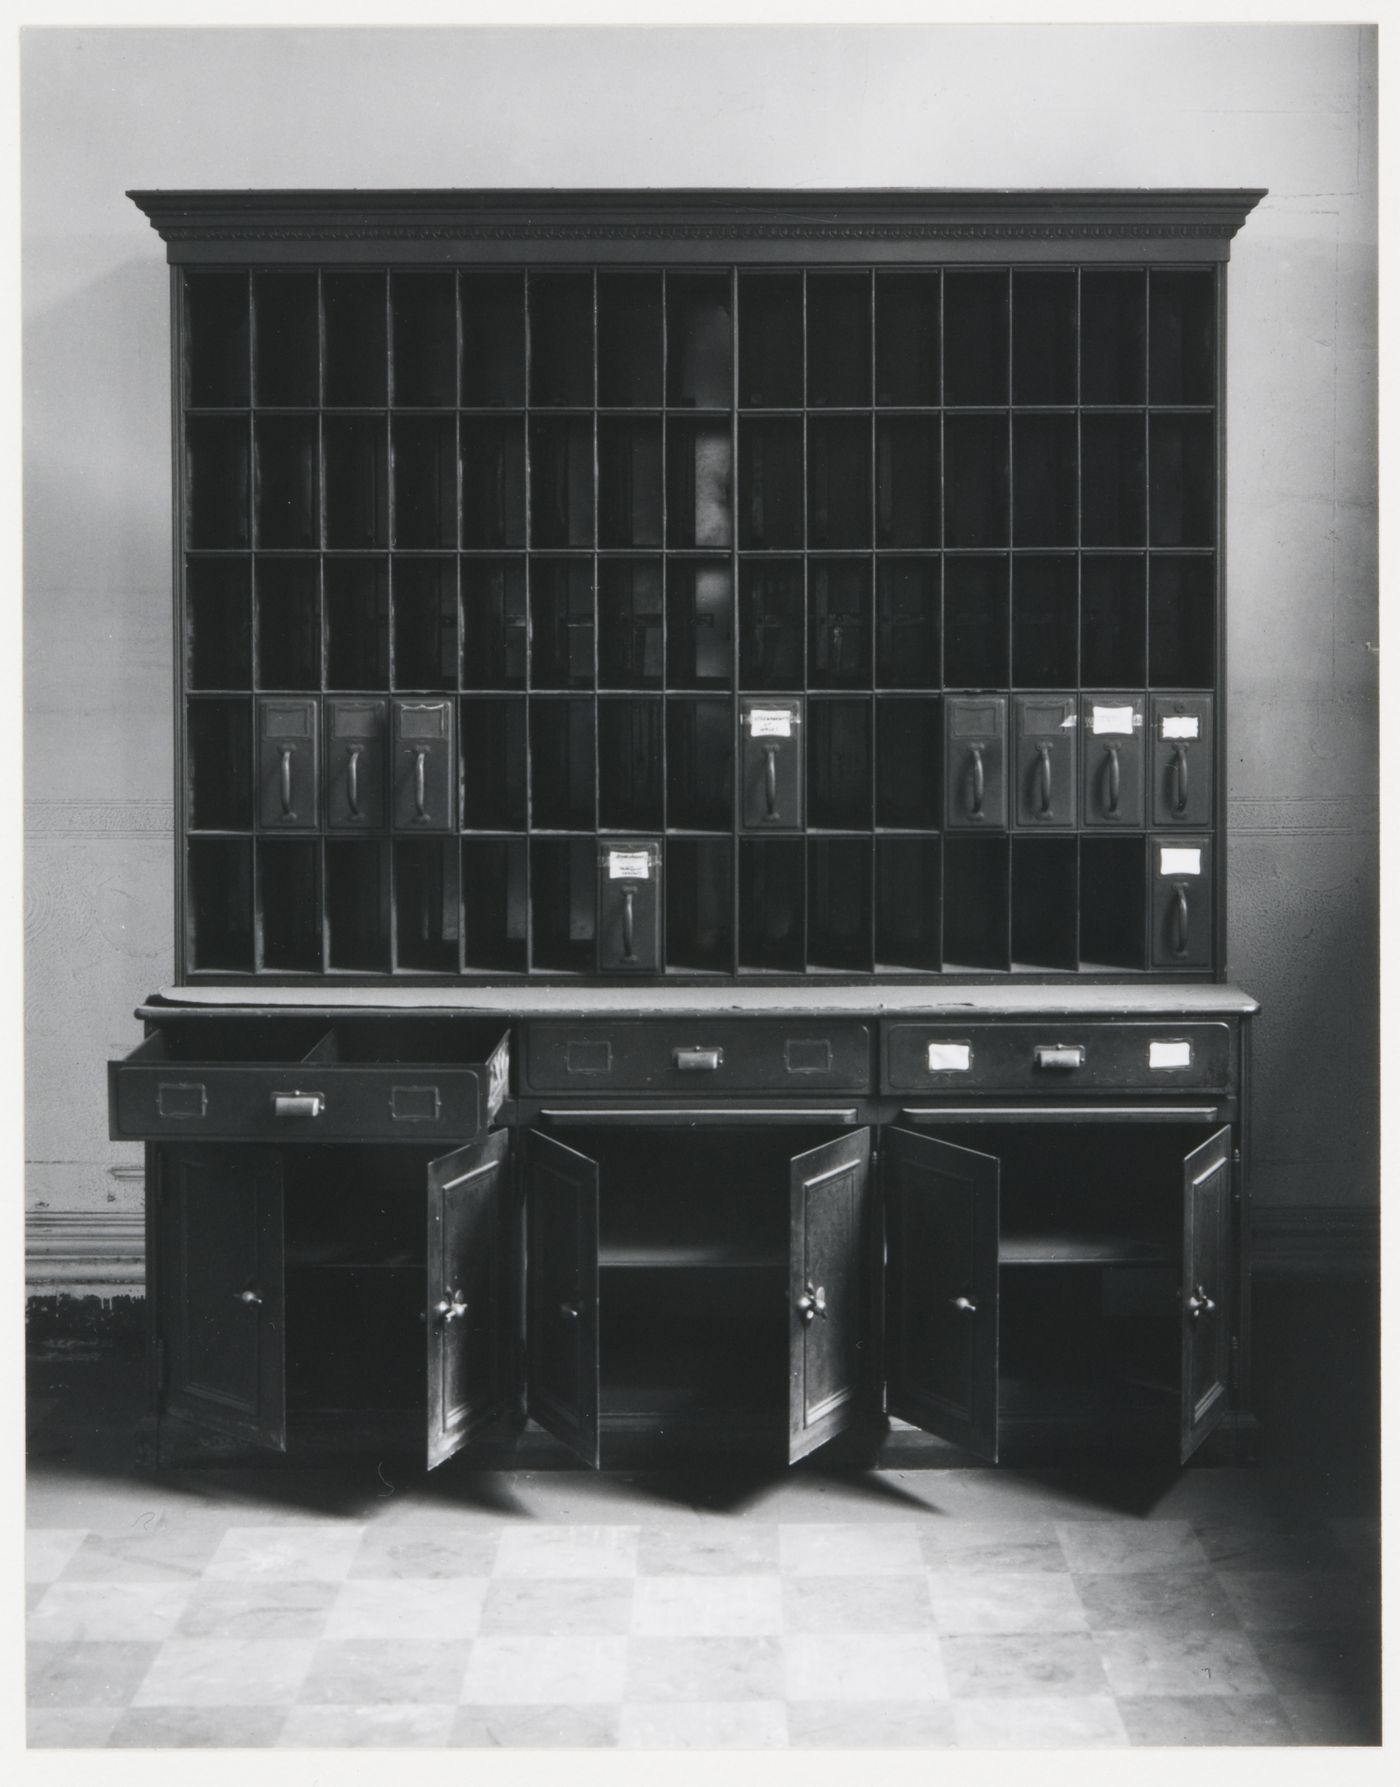 View of file cabinet, city clerk's office, second floor, Old City Hall, Boston, Massachusetts, United States